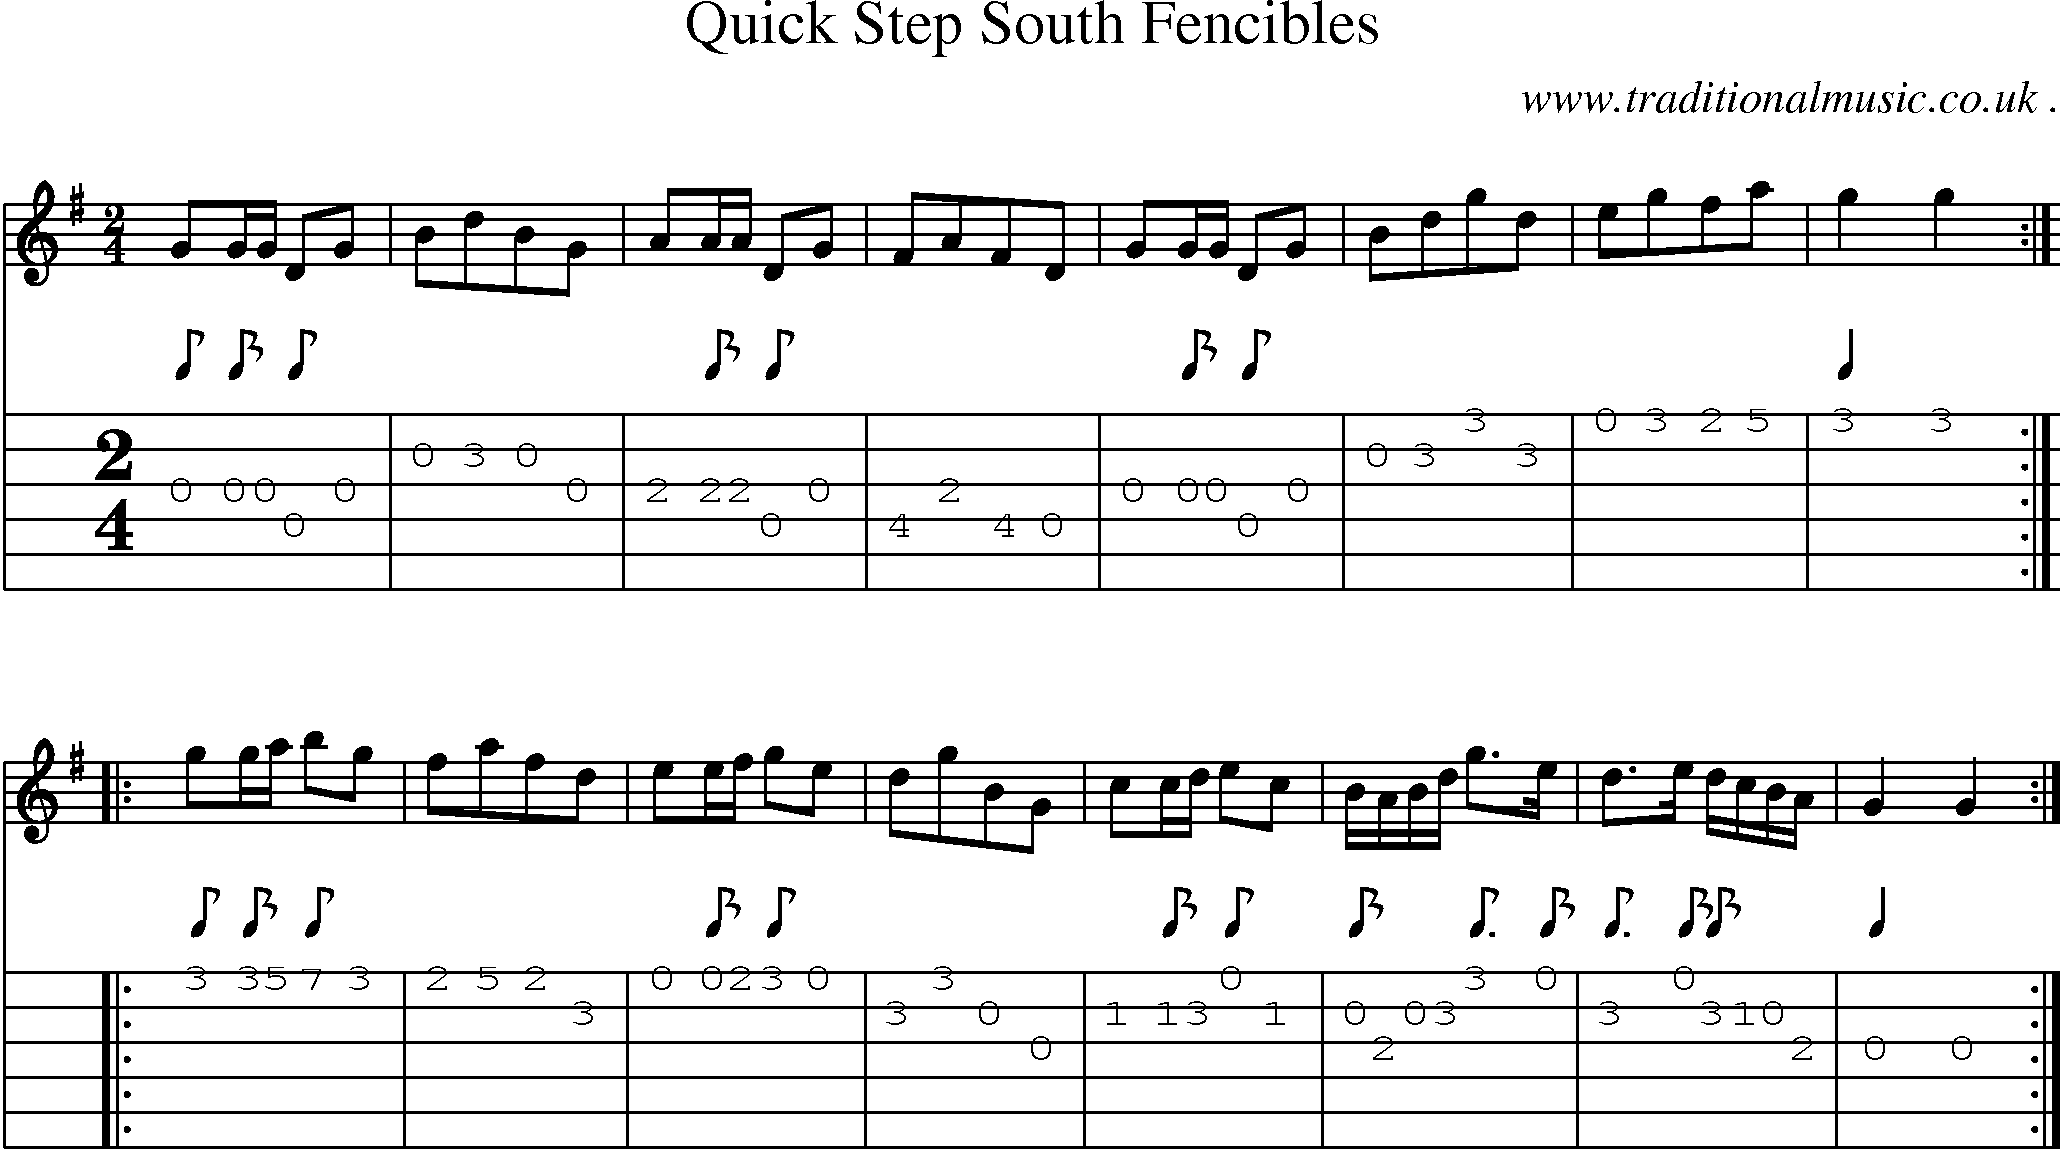 Sheet-Music and Guitar Tabs for Quick Step South Fencibles